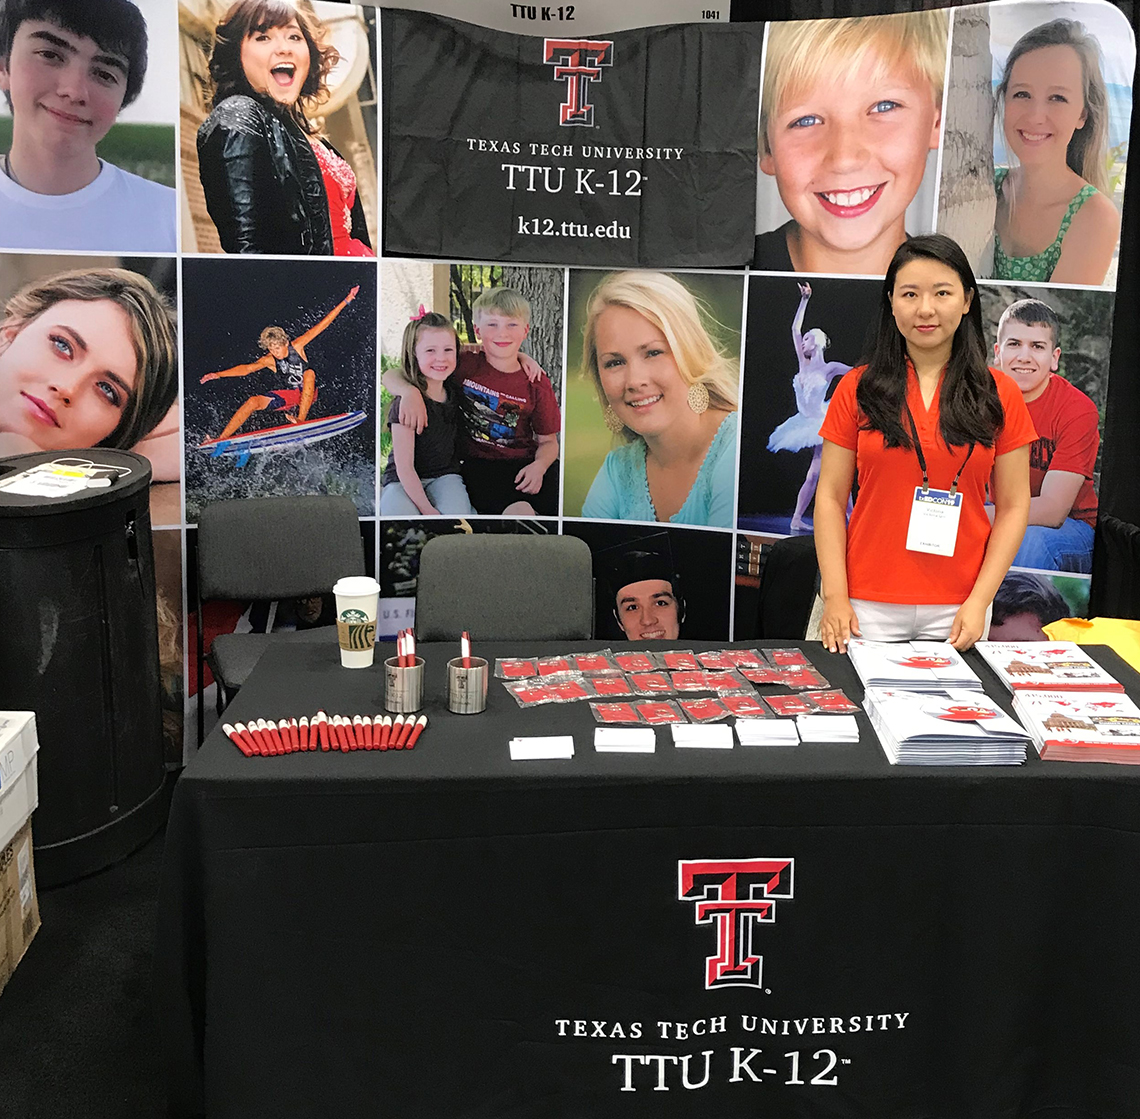 A young woman wearing a red texas tech shirt stands behind a table with ttu k-12 merchandise spread across while also standing in front of a large TTU K-12 banner